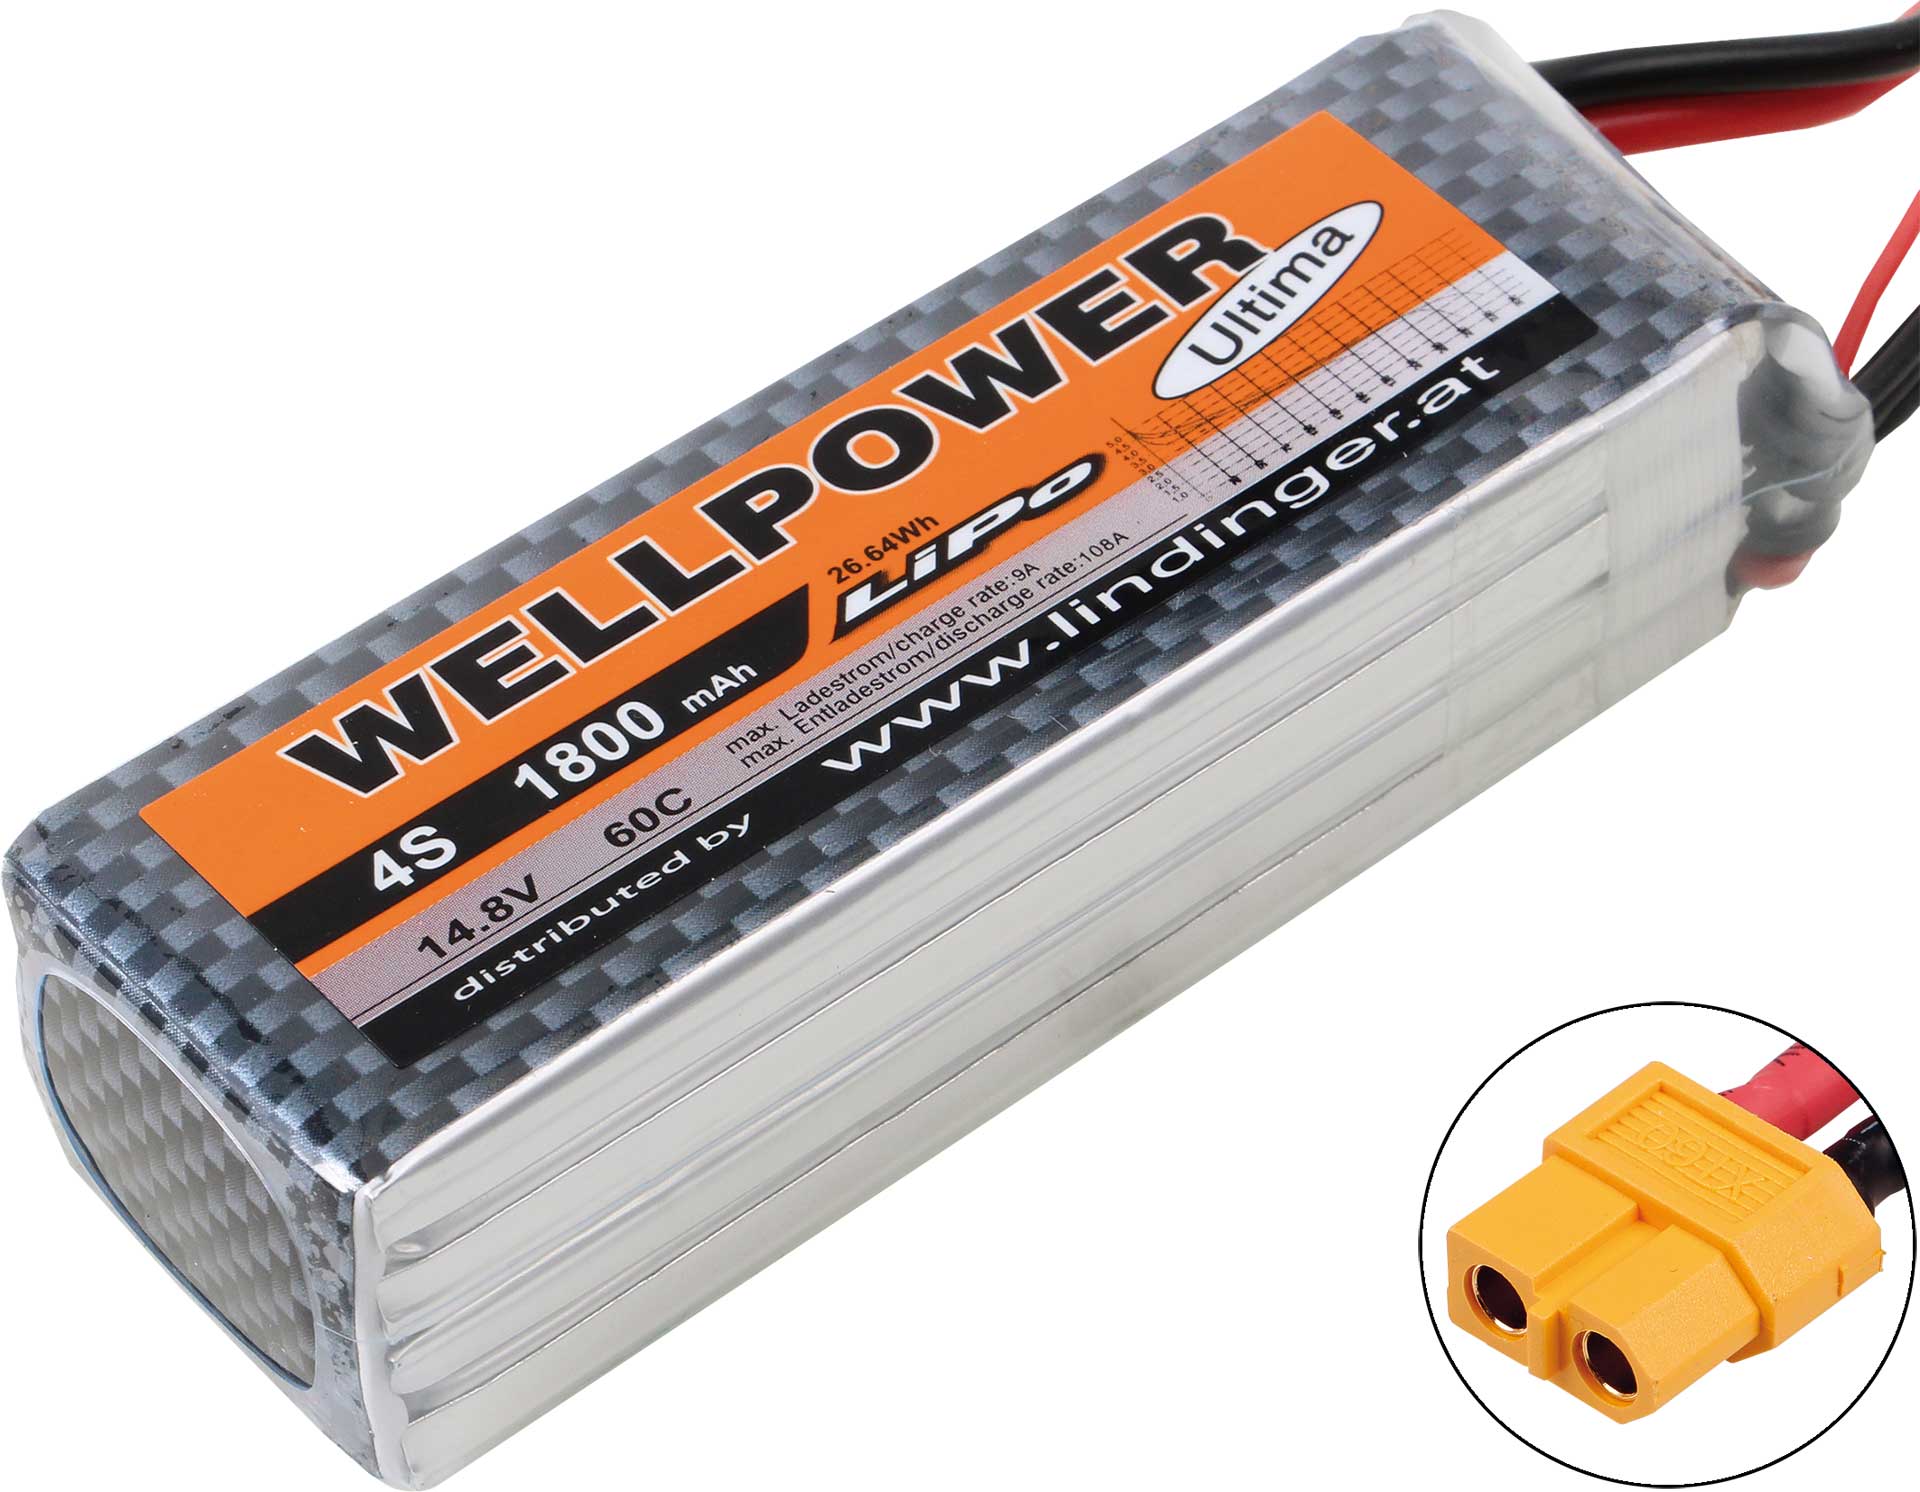 WELLPOWER LIPO BATTERY  PACK ULTIMA 1800 MAH / 14,8 VOLT 4S 60/120C CH5 WITH XT 60 PLUG SYSTEM